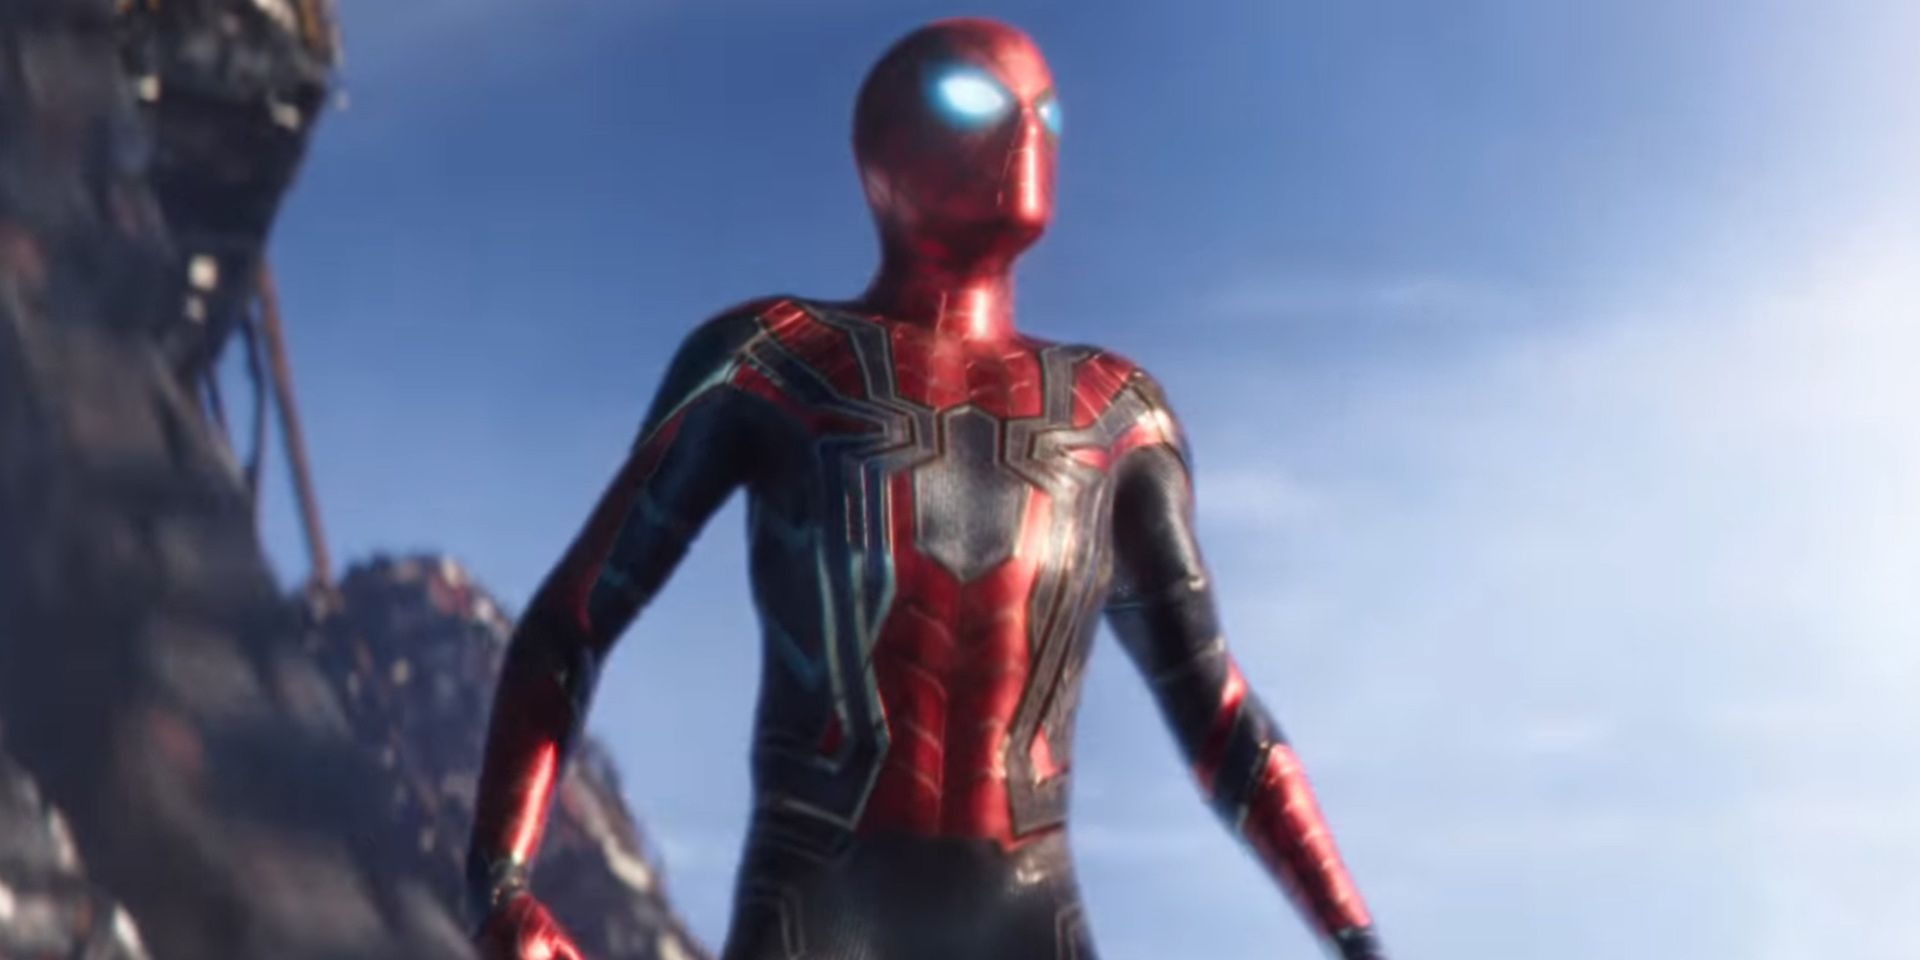 Spider-Man standing on the ship in Avengers Infinity War (2018